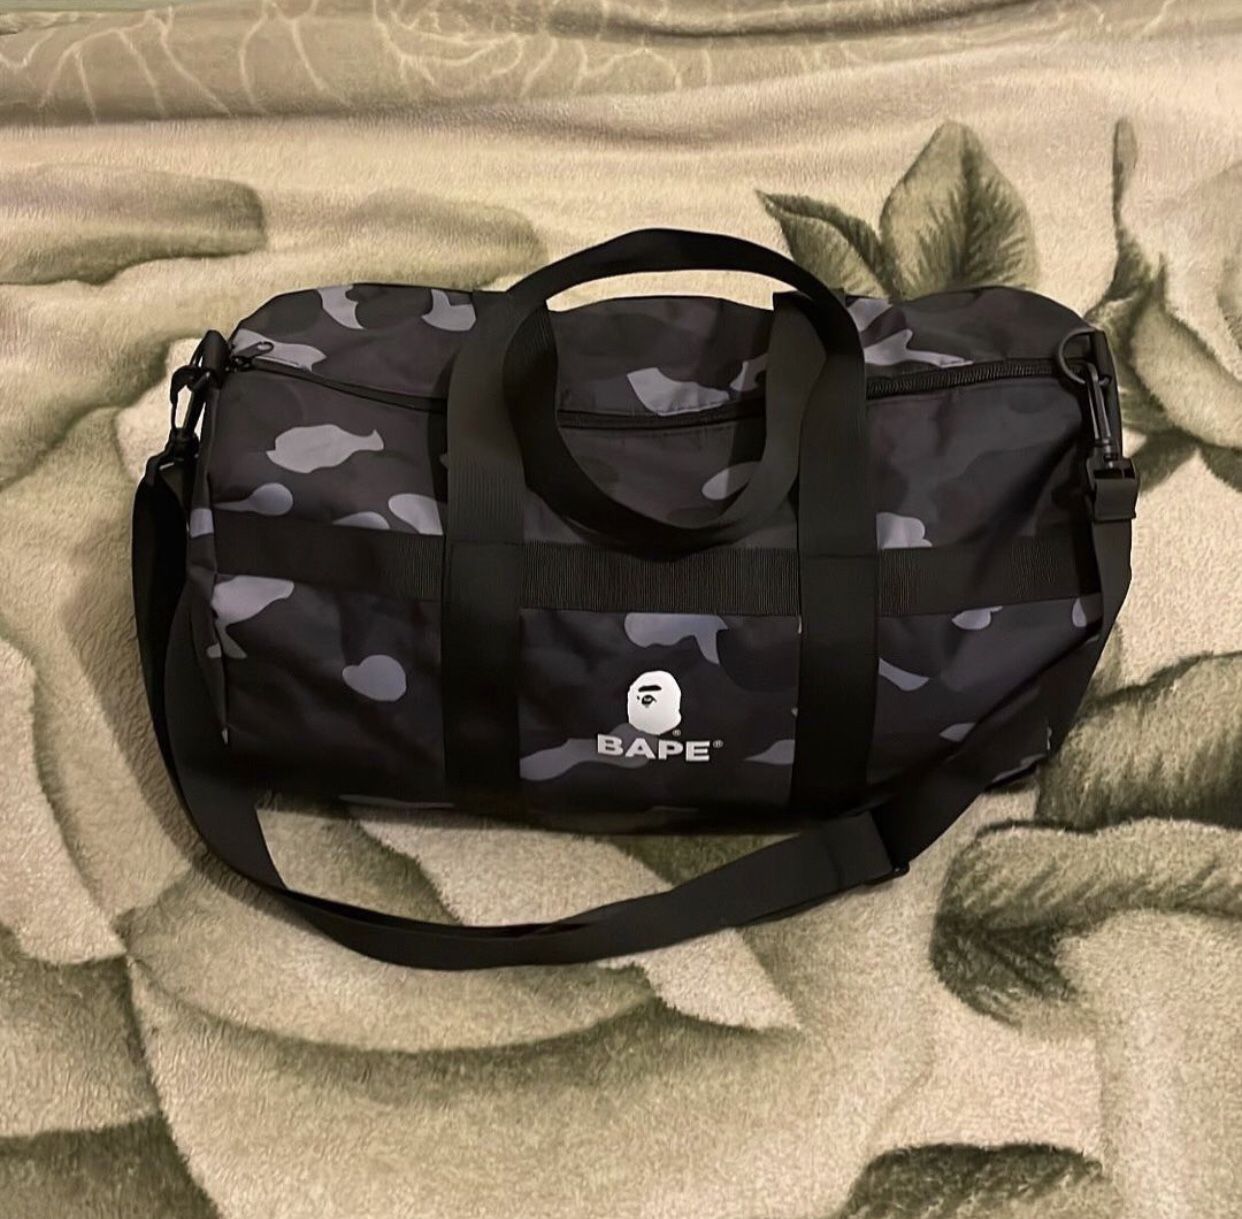 Bape 2022 Spring Collection Duffle Bag w/Magazine for Sale in Los Angeles,  CA - OfferUp